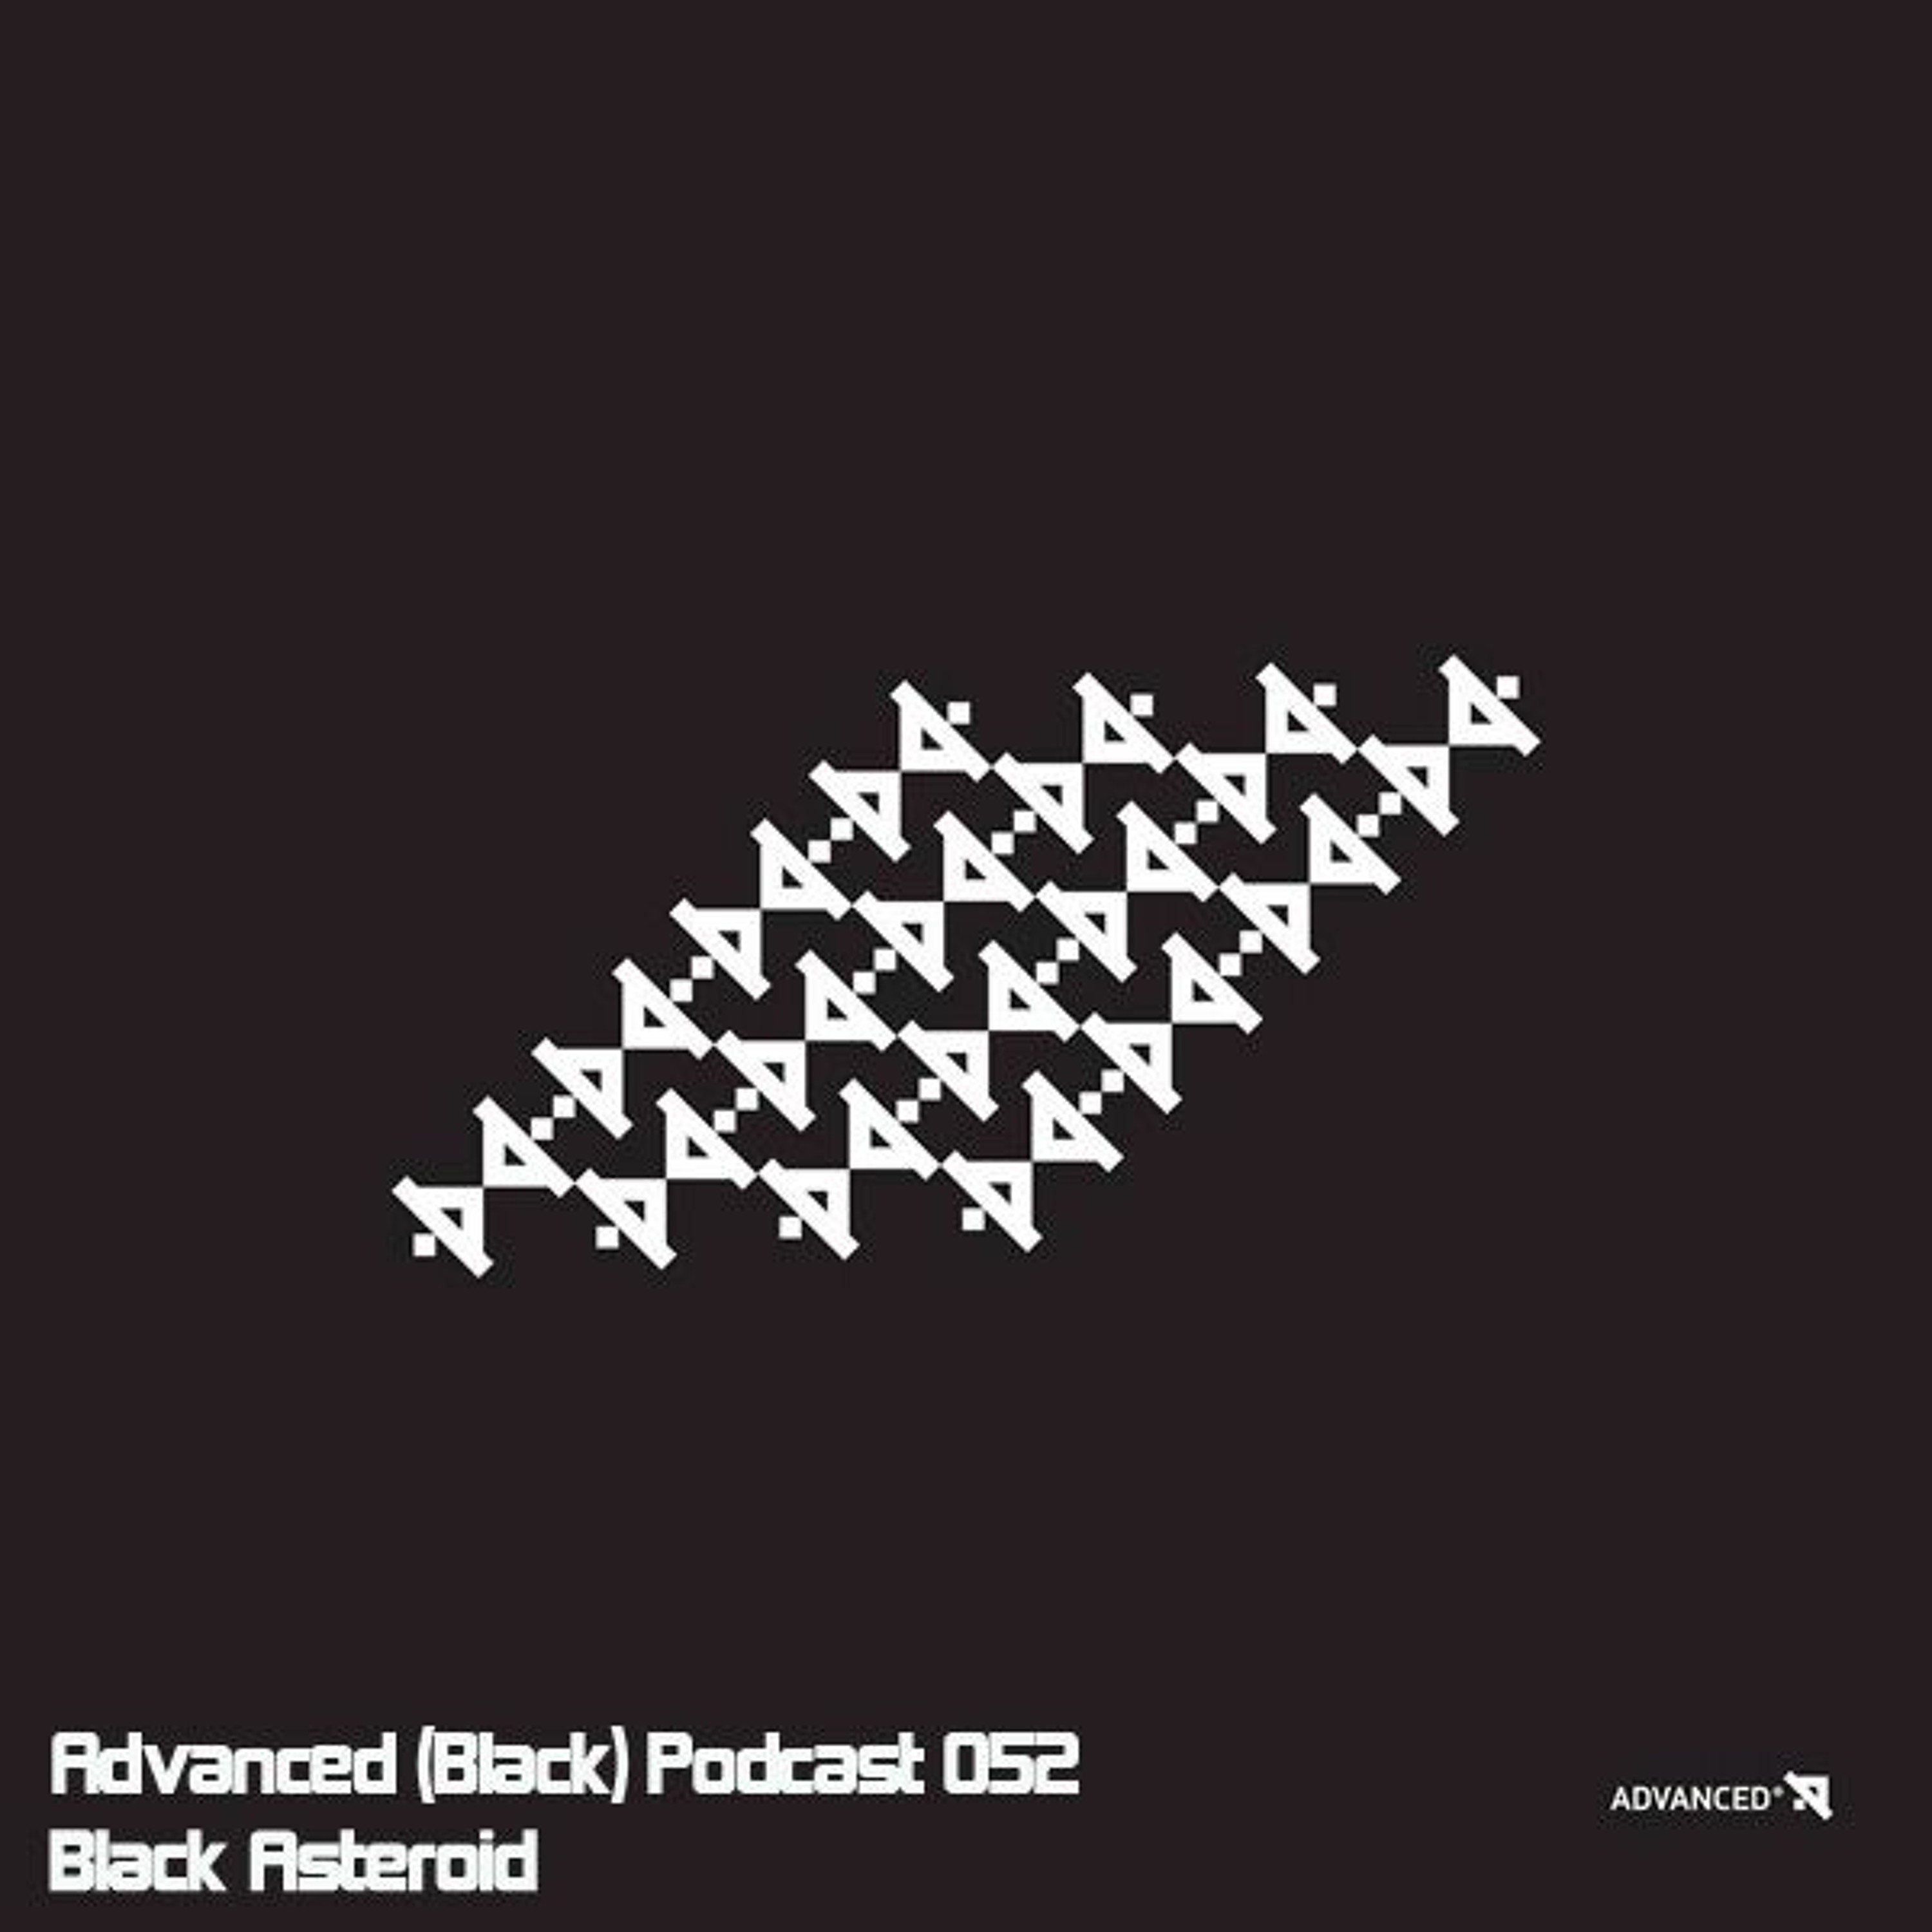 Advanced (Black) Podcast 052 with Black Asteroid